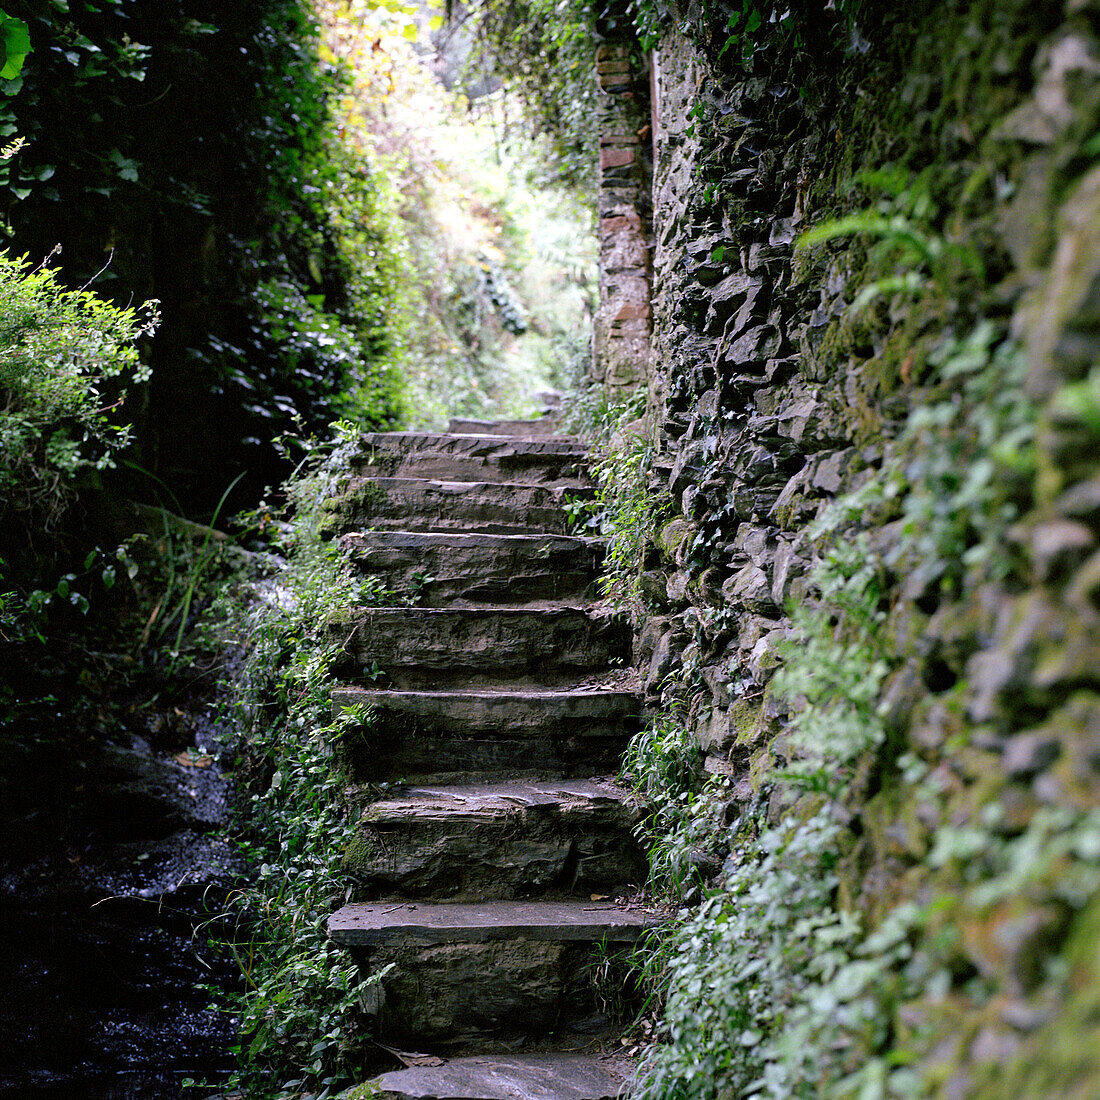 Stairs made of stone, Cinque Terre, Italy